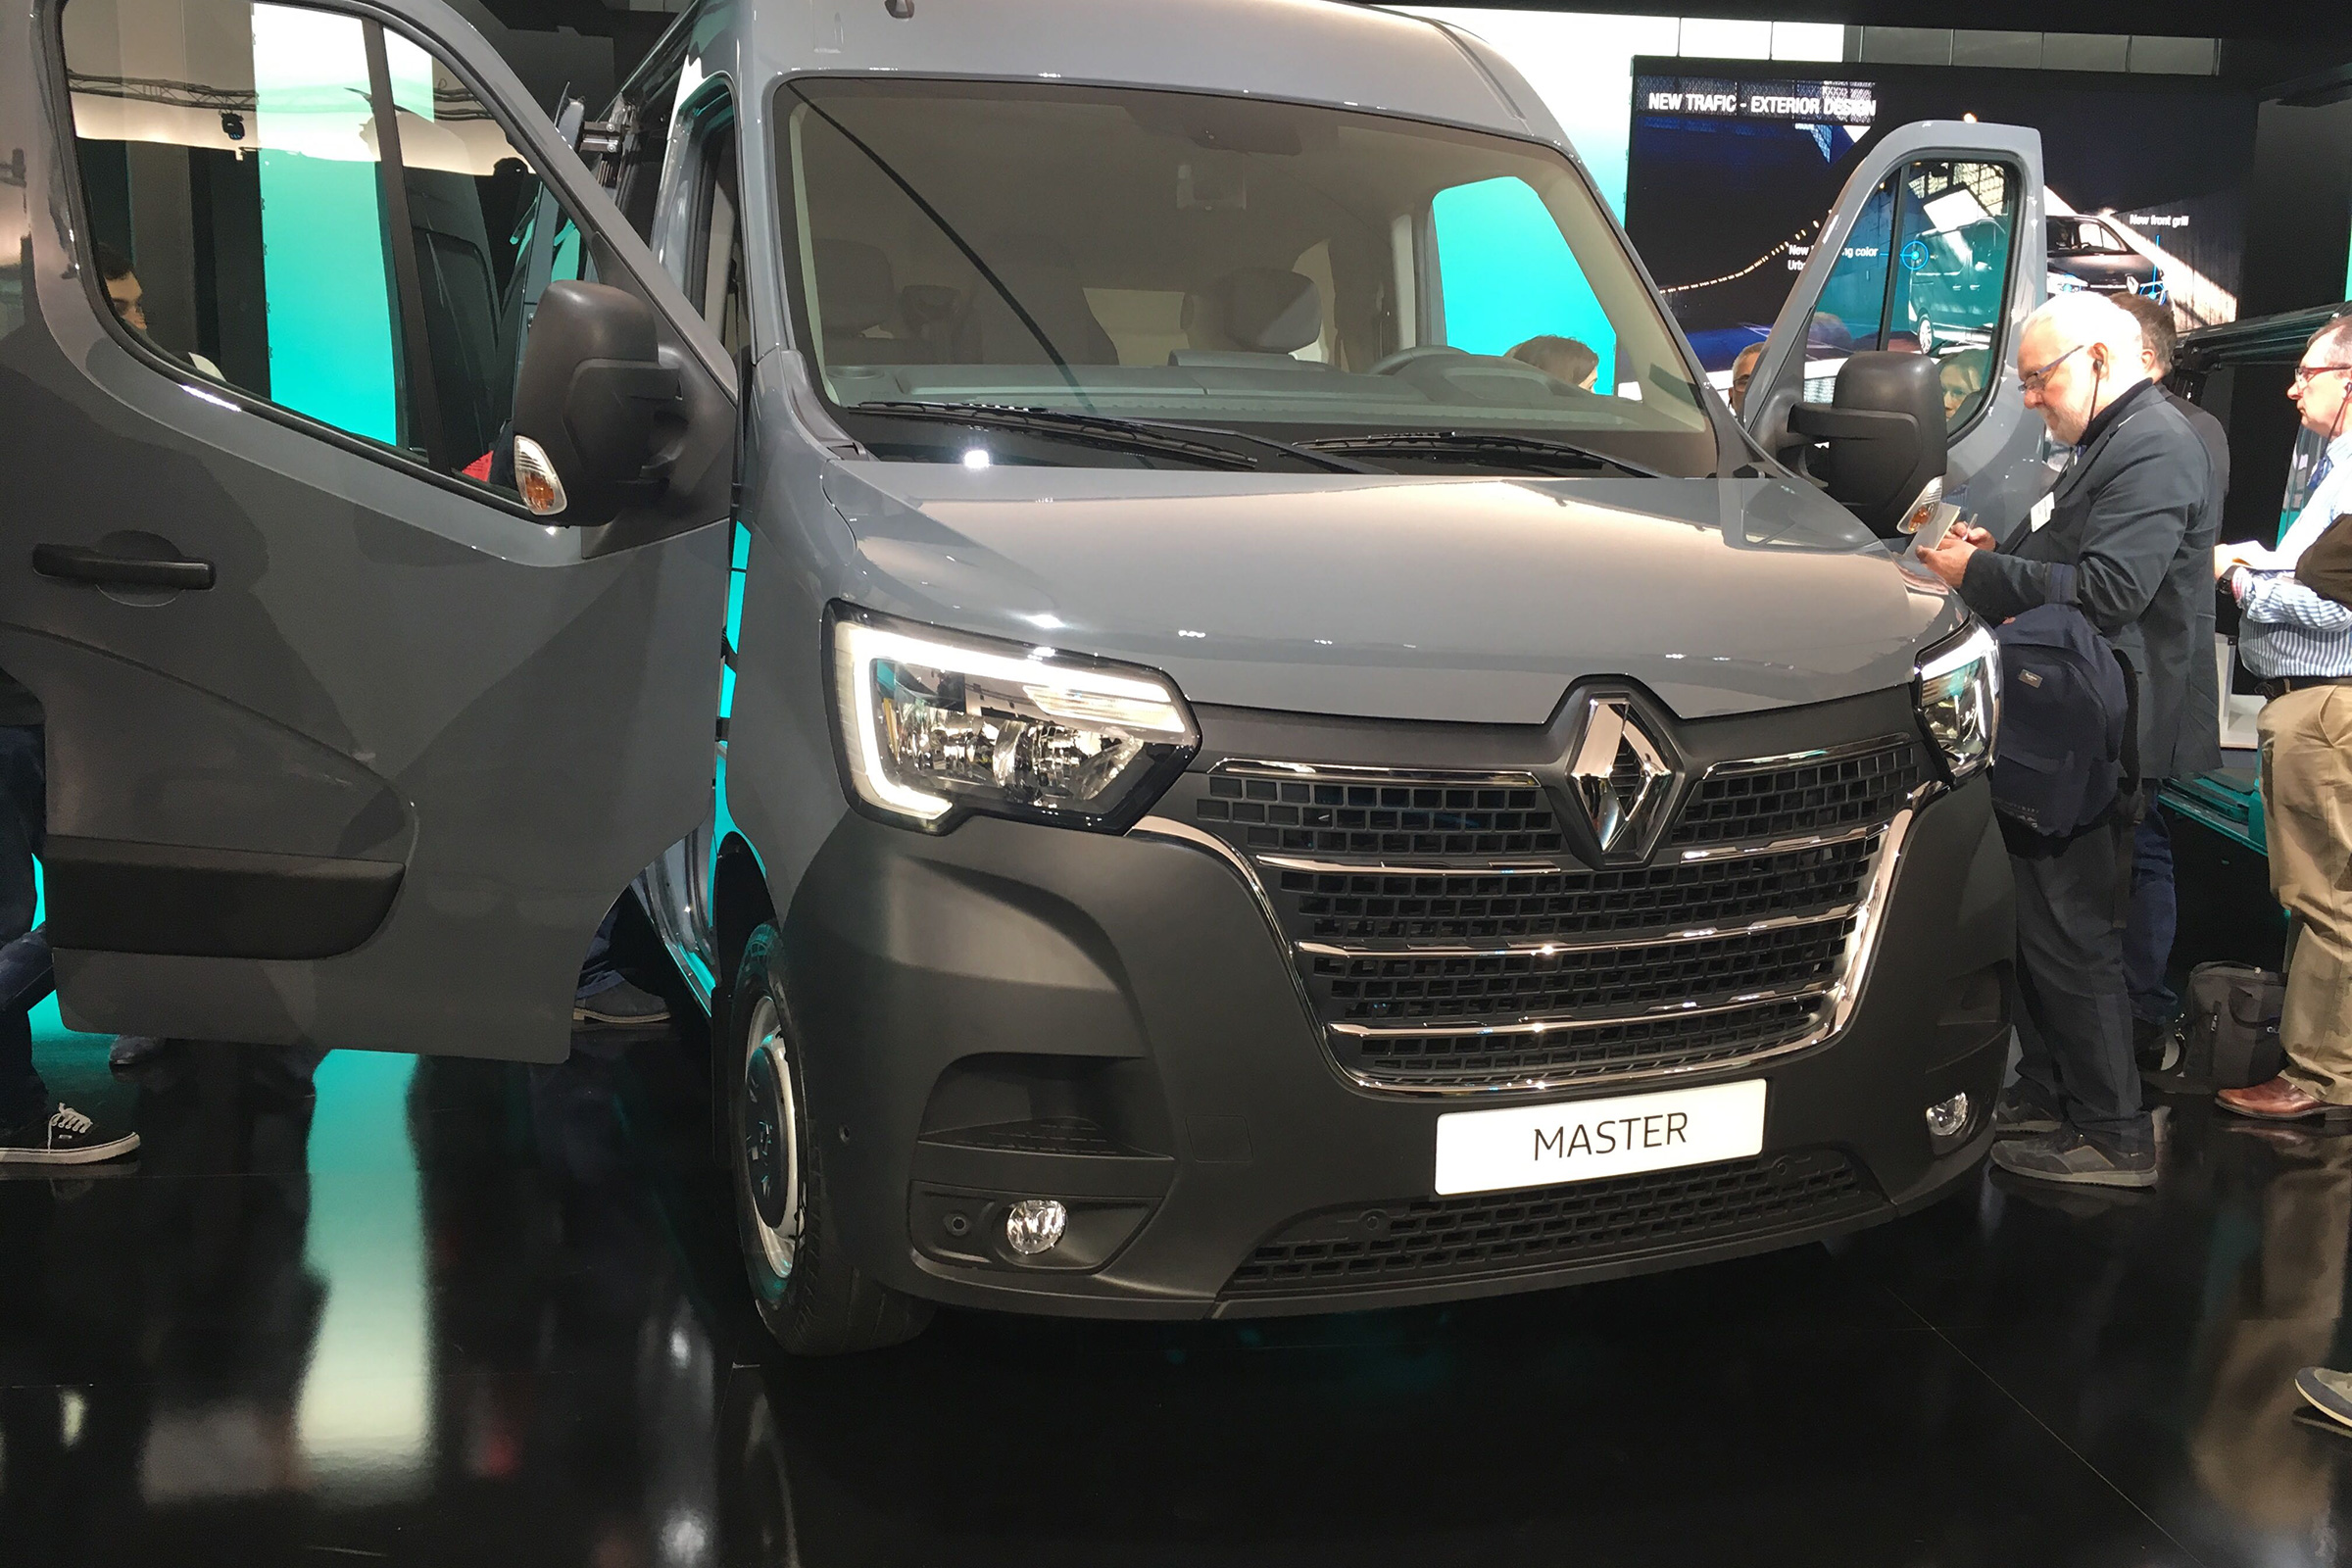 New 2019 Renault Master: UK prices and specs confirmed 